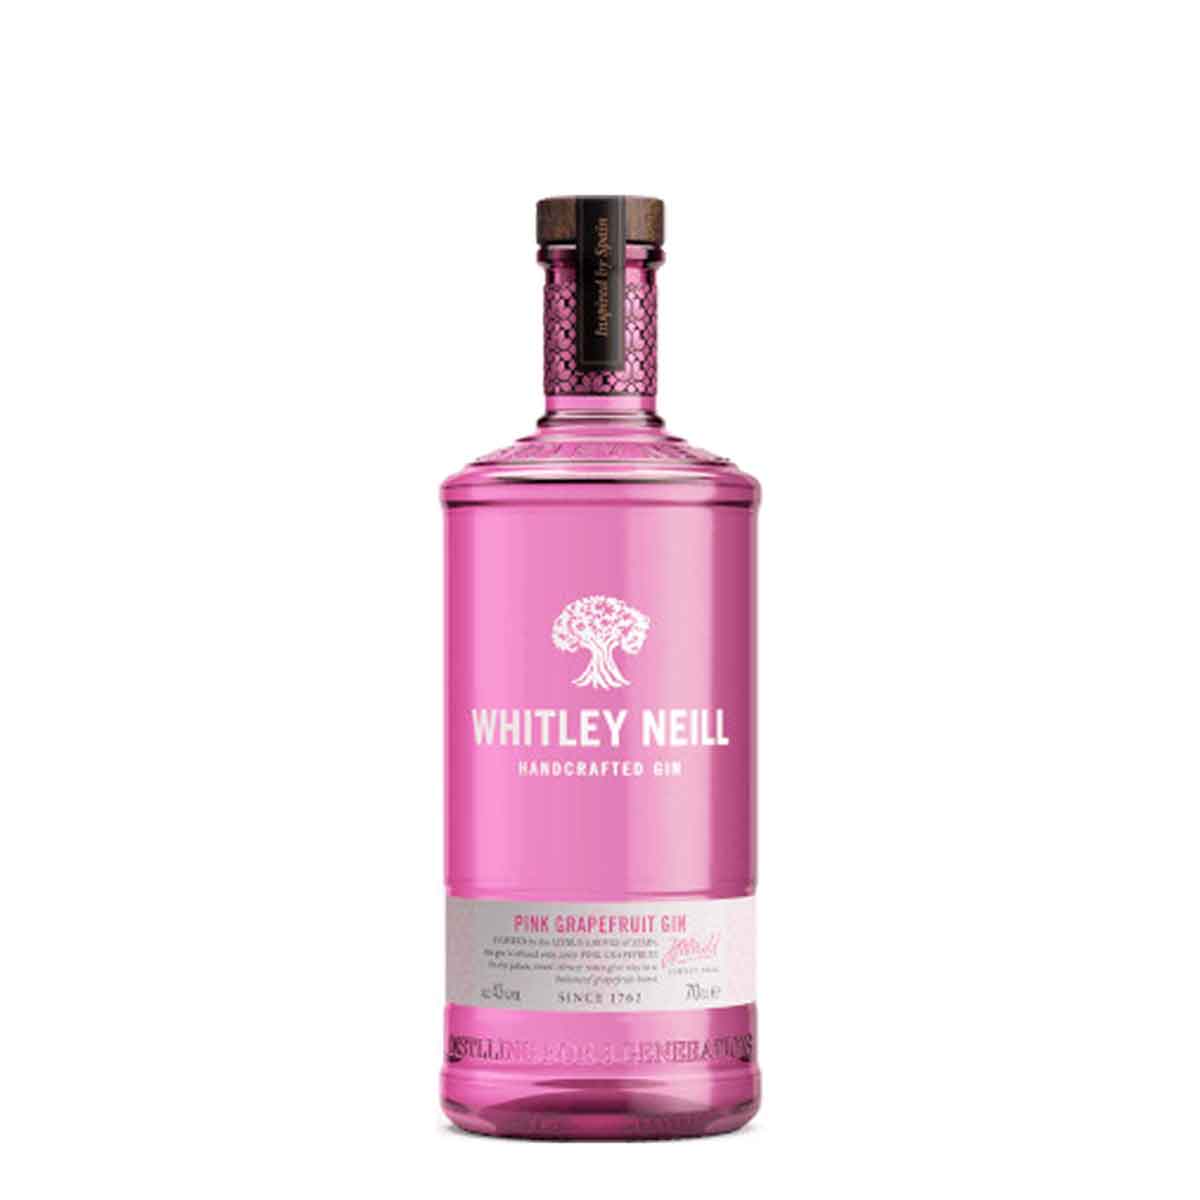 TAG Liquor Stores BC-WHITLEY NEILL PINK GRAPEFRUIT GIN 750ML